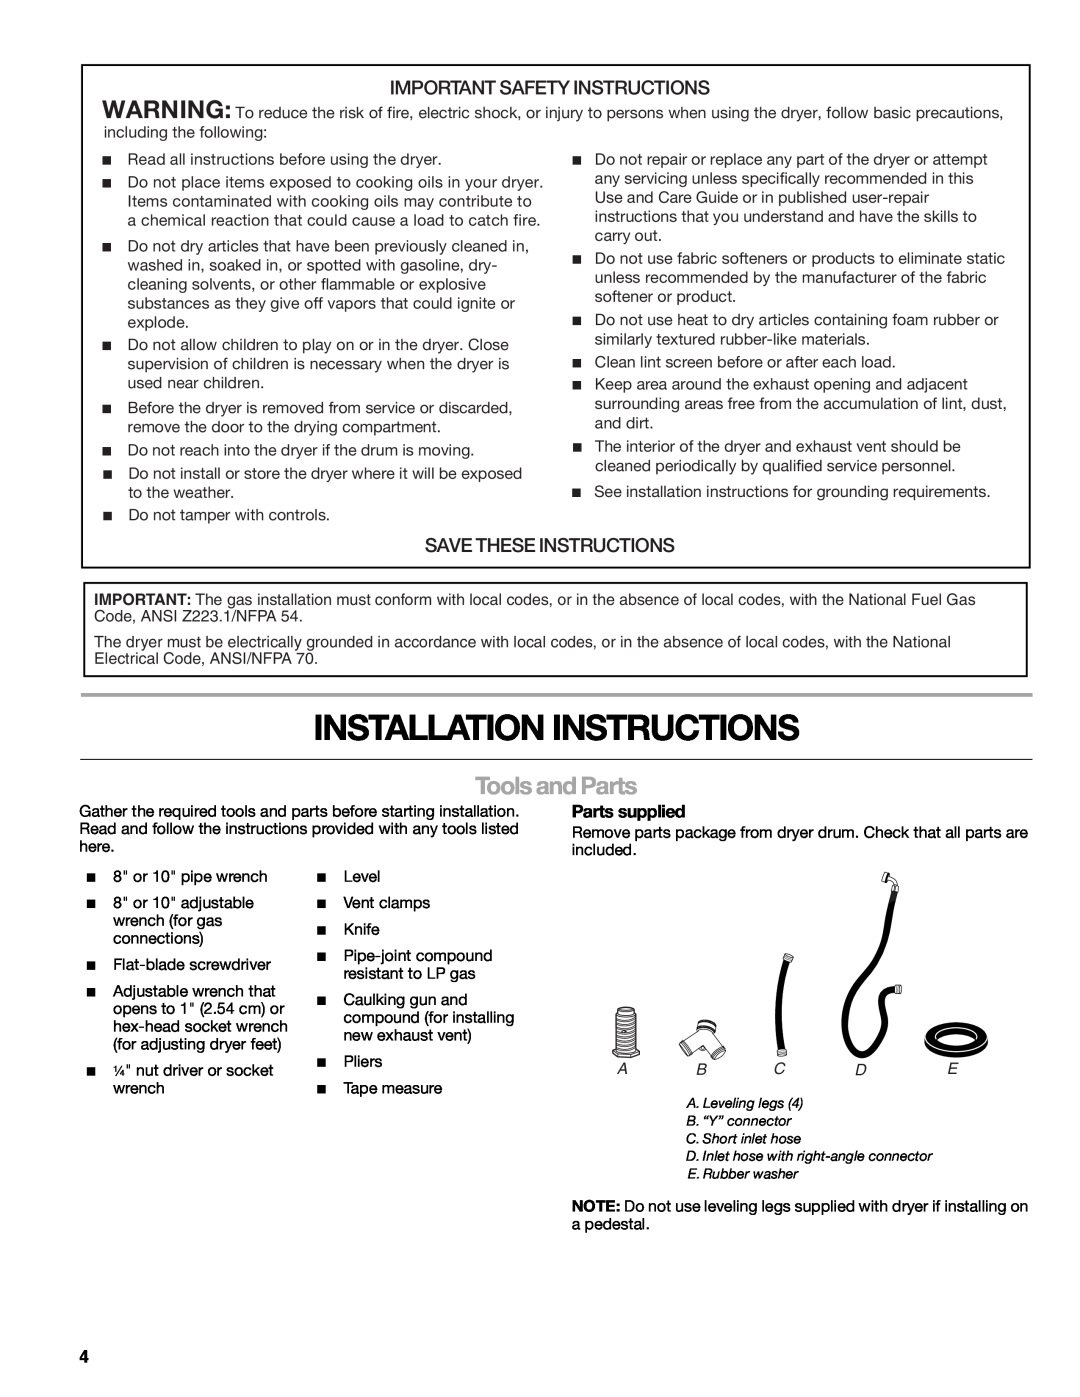 Suunto 110.9772 manual Installation Instructions, Tools and Parts, Important Safety Instructions, Save These Instructions 